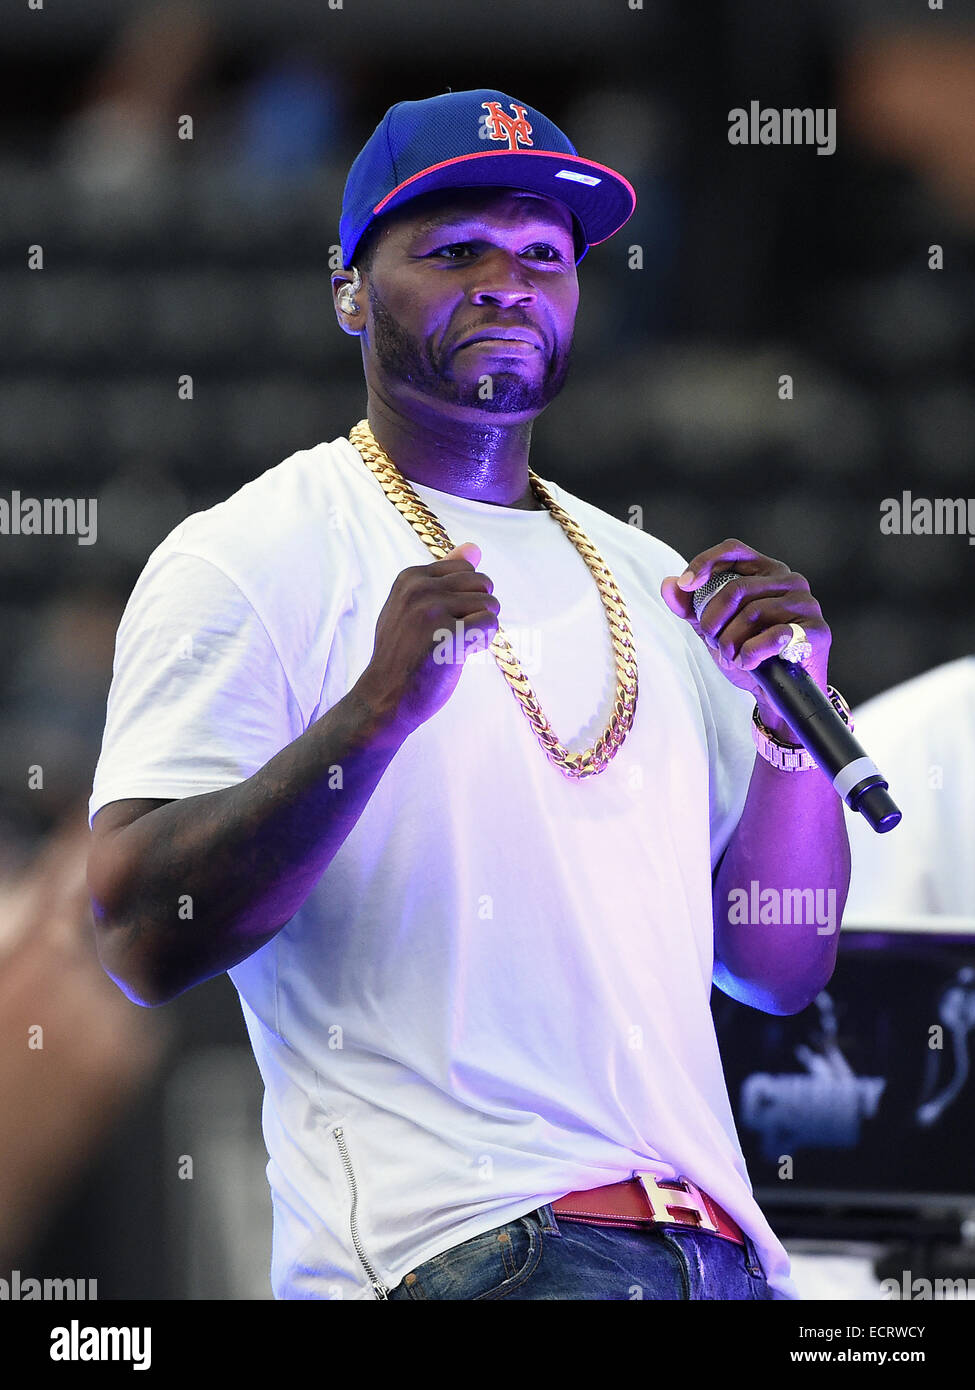 50 Cent performs live during a post-game concert at Citi Field on Saturday (14Jun14) following the New York Mets 0-5 loss against the San Diego Padres. This was a return to Citi Field for the rapper, who threw out what many are calling the worst first pit Stock Photo